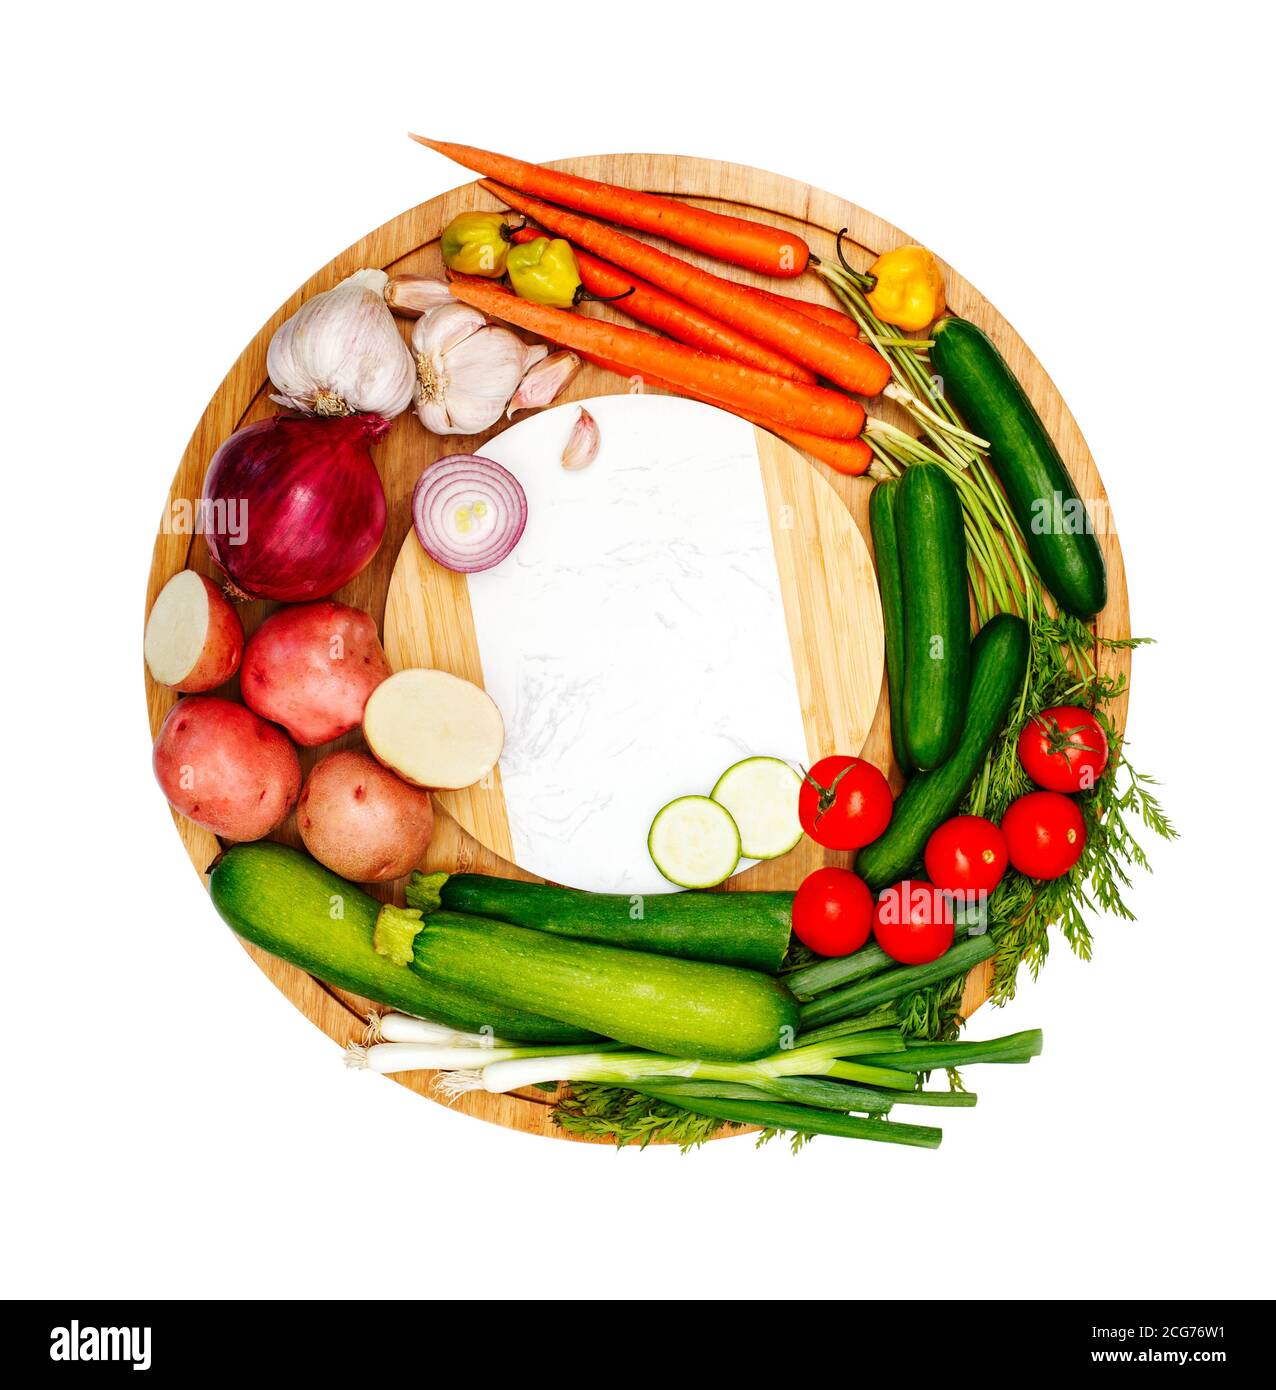 Fresh fruit and vegetables on a circular chopping board Stock Photo